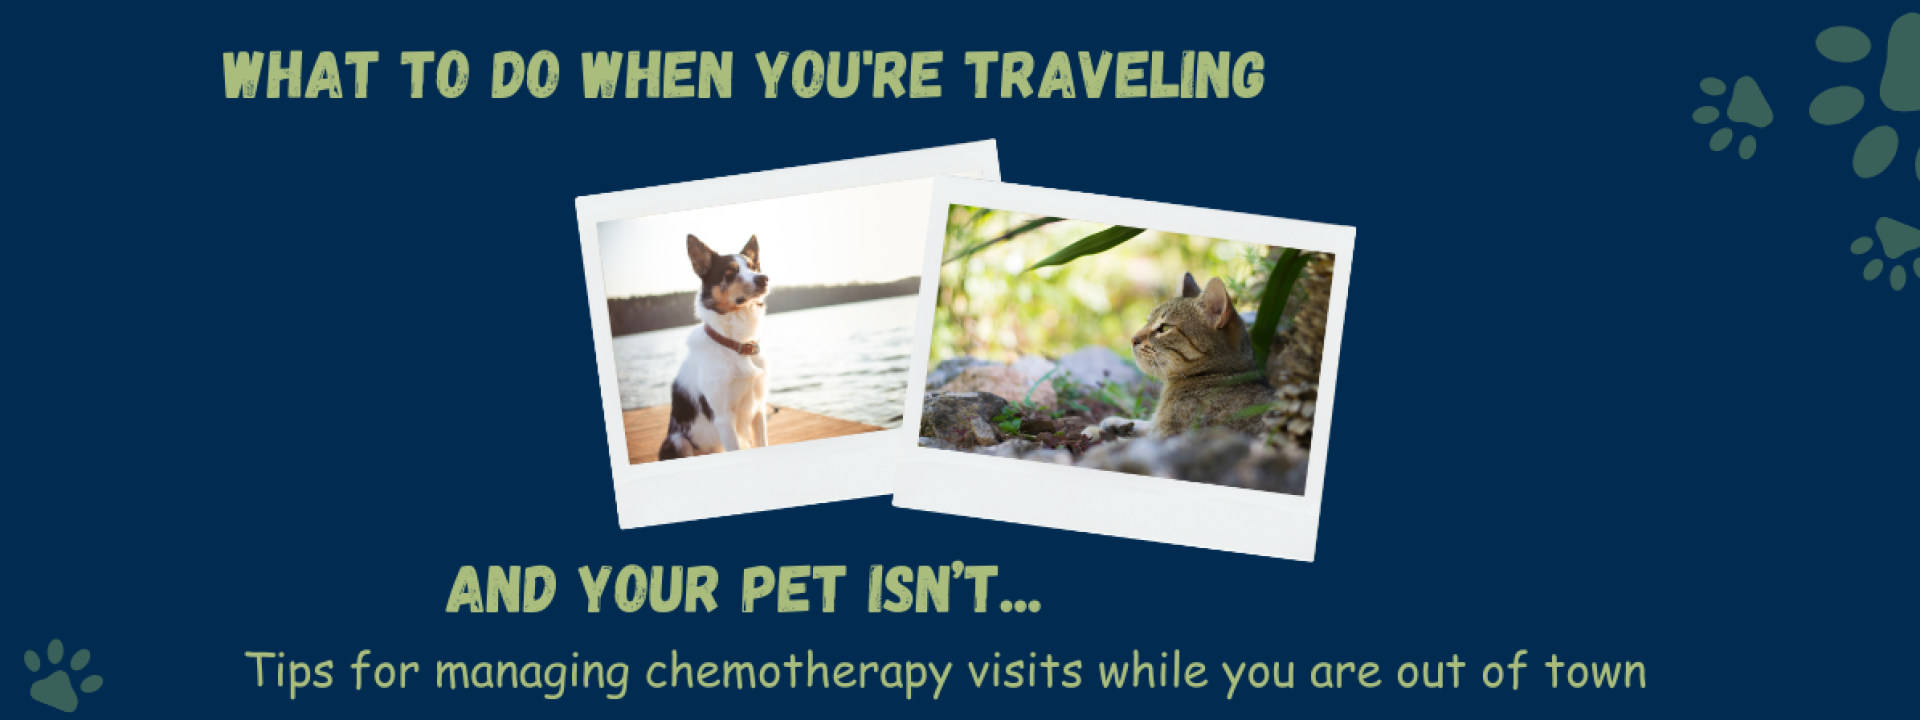 What to do when you're traveling and your pet isn't